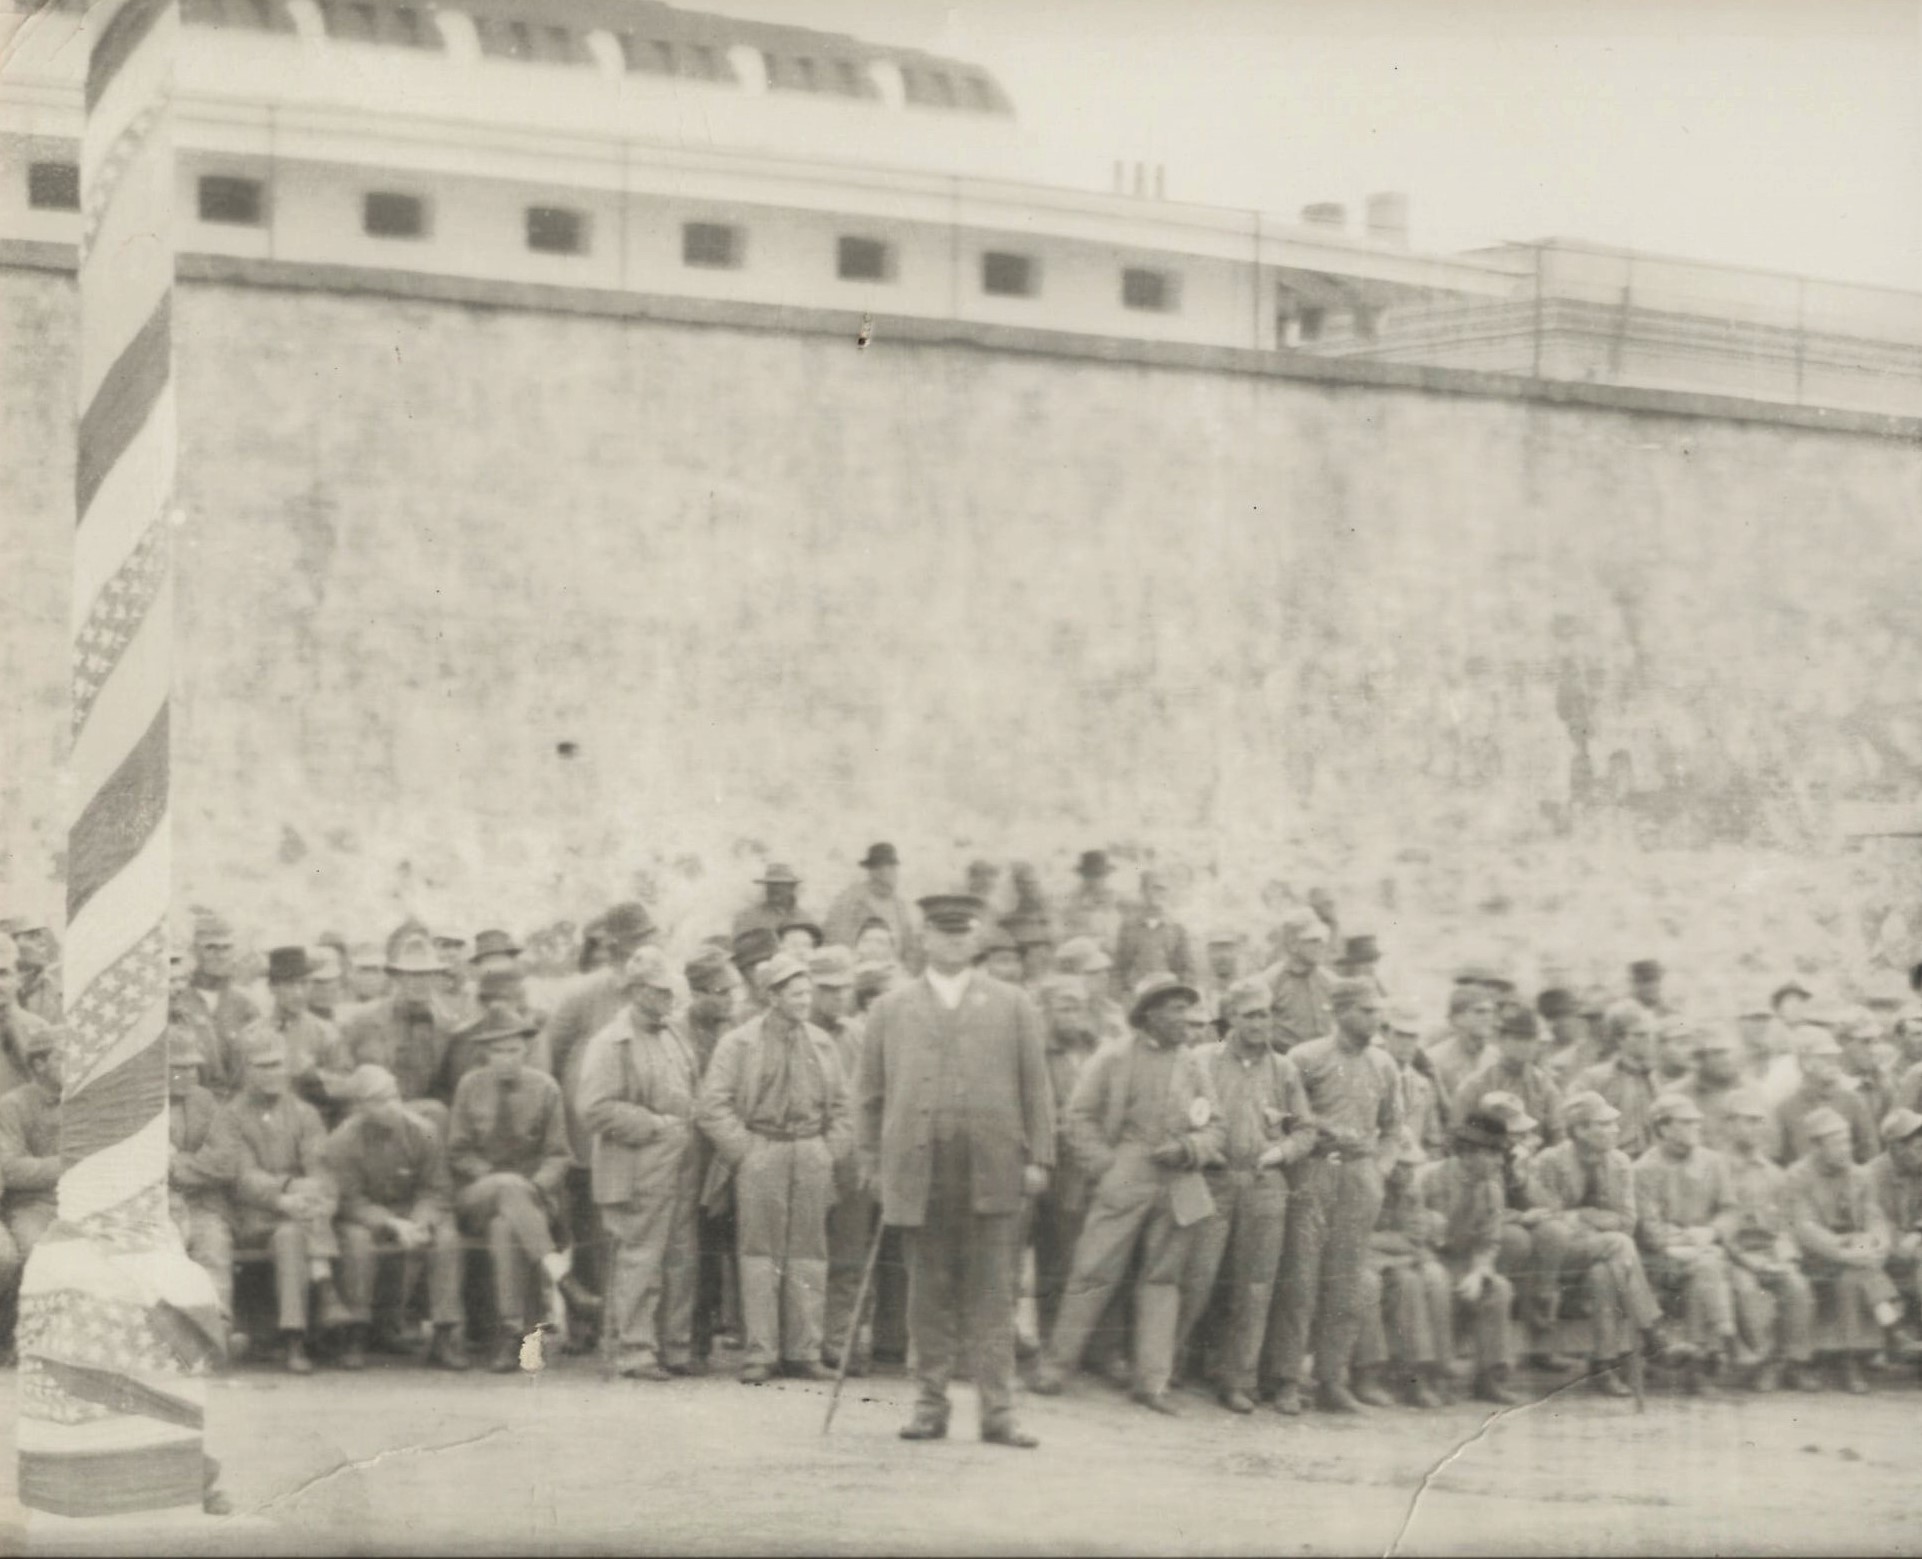 San Quentin inmates watch a baseball game while a guard supervises.